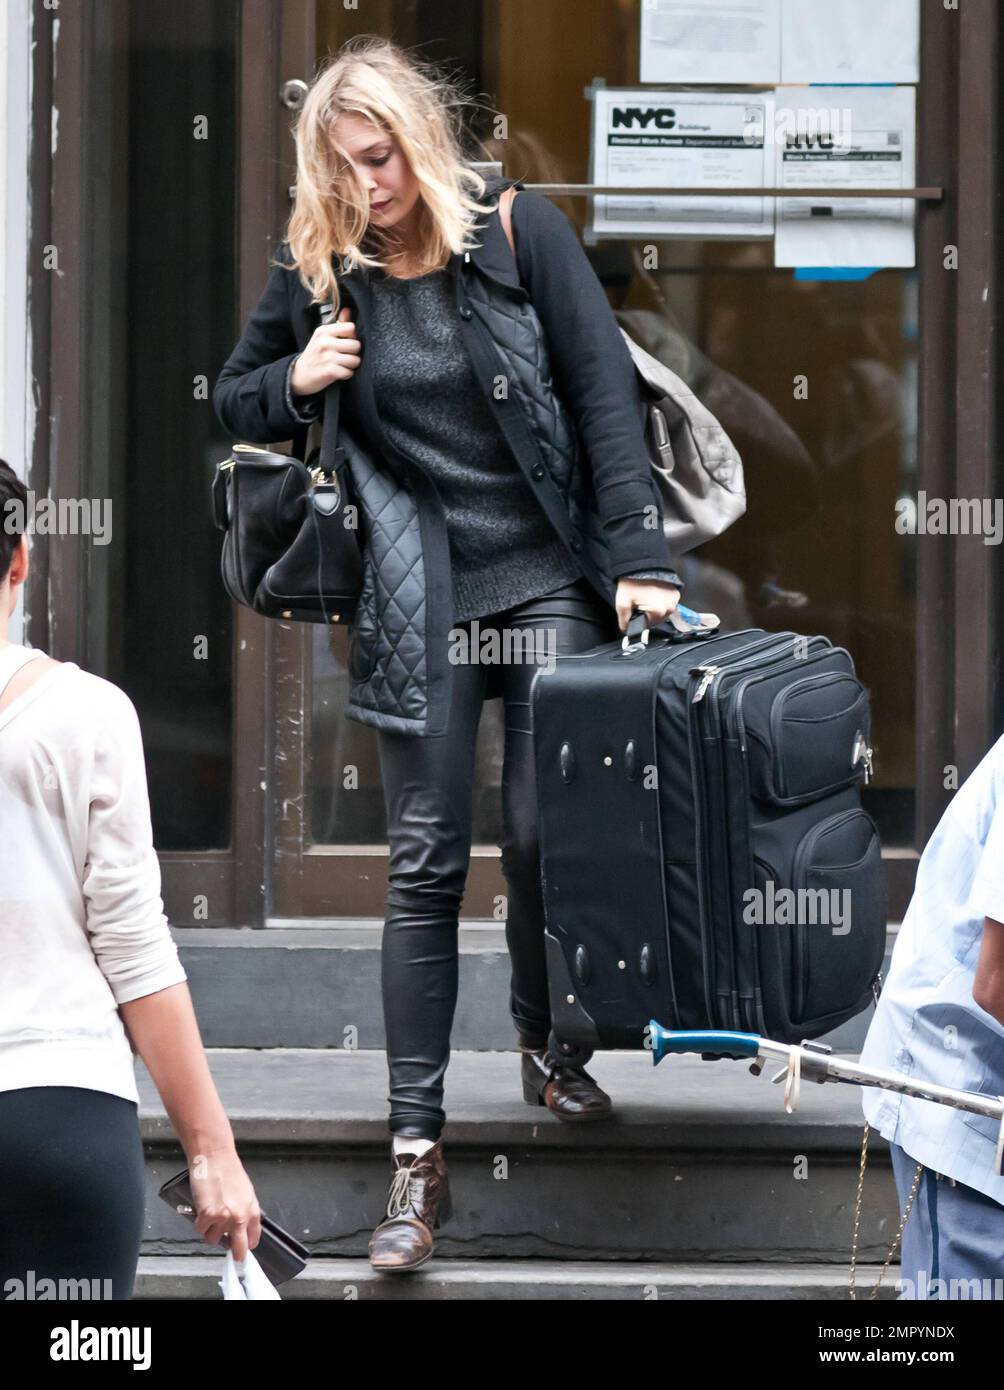 Actress Elizabeth Olsen, younger sister to famous twins Mary-Kate Olsen and Ashley Olsen, was seen departing her West Village apartment with luggage in hand as she made her way to the airport to catch a flight to Los Angeles. It's been reported that Elizabeth has become an overnight starlet with her lead debut in 'Martha Marcy May Marlene' which premiered earlier this week at the New York Film Festival. The film has a limited release date of October 21st and is already generating Oscar buzz. New York, NY. 13th October 2011.   . Stock Photo